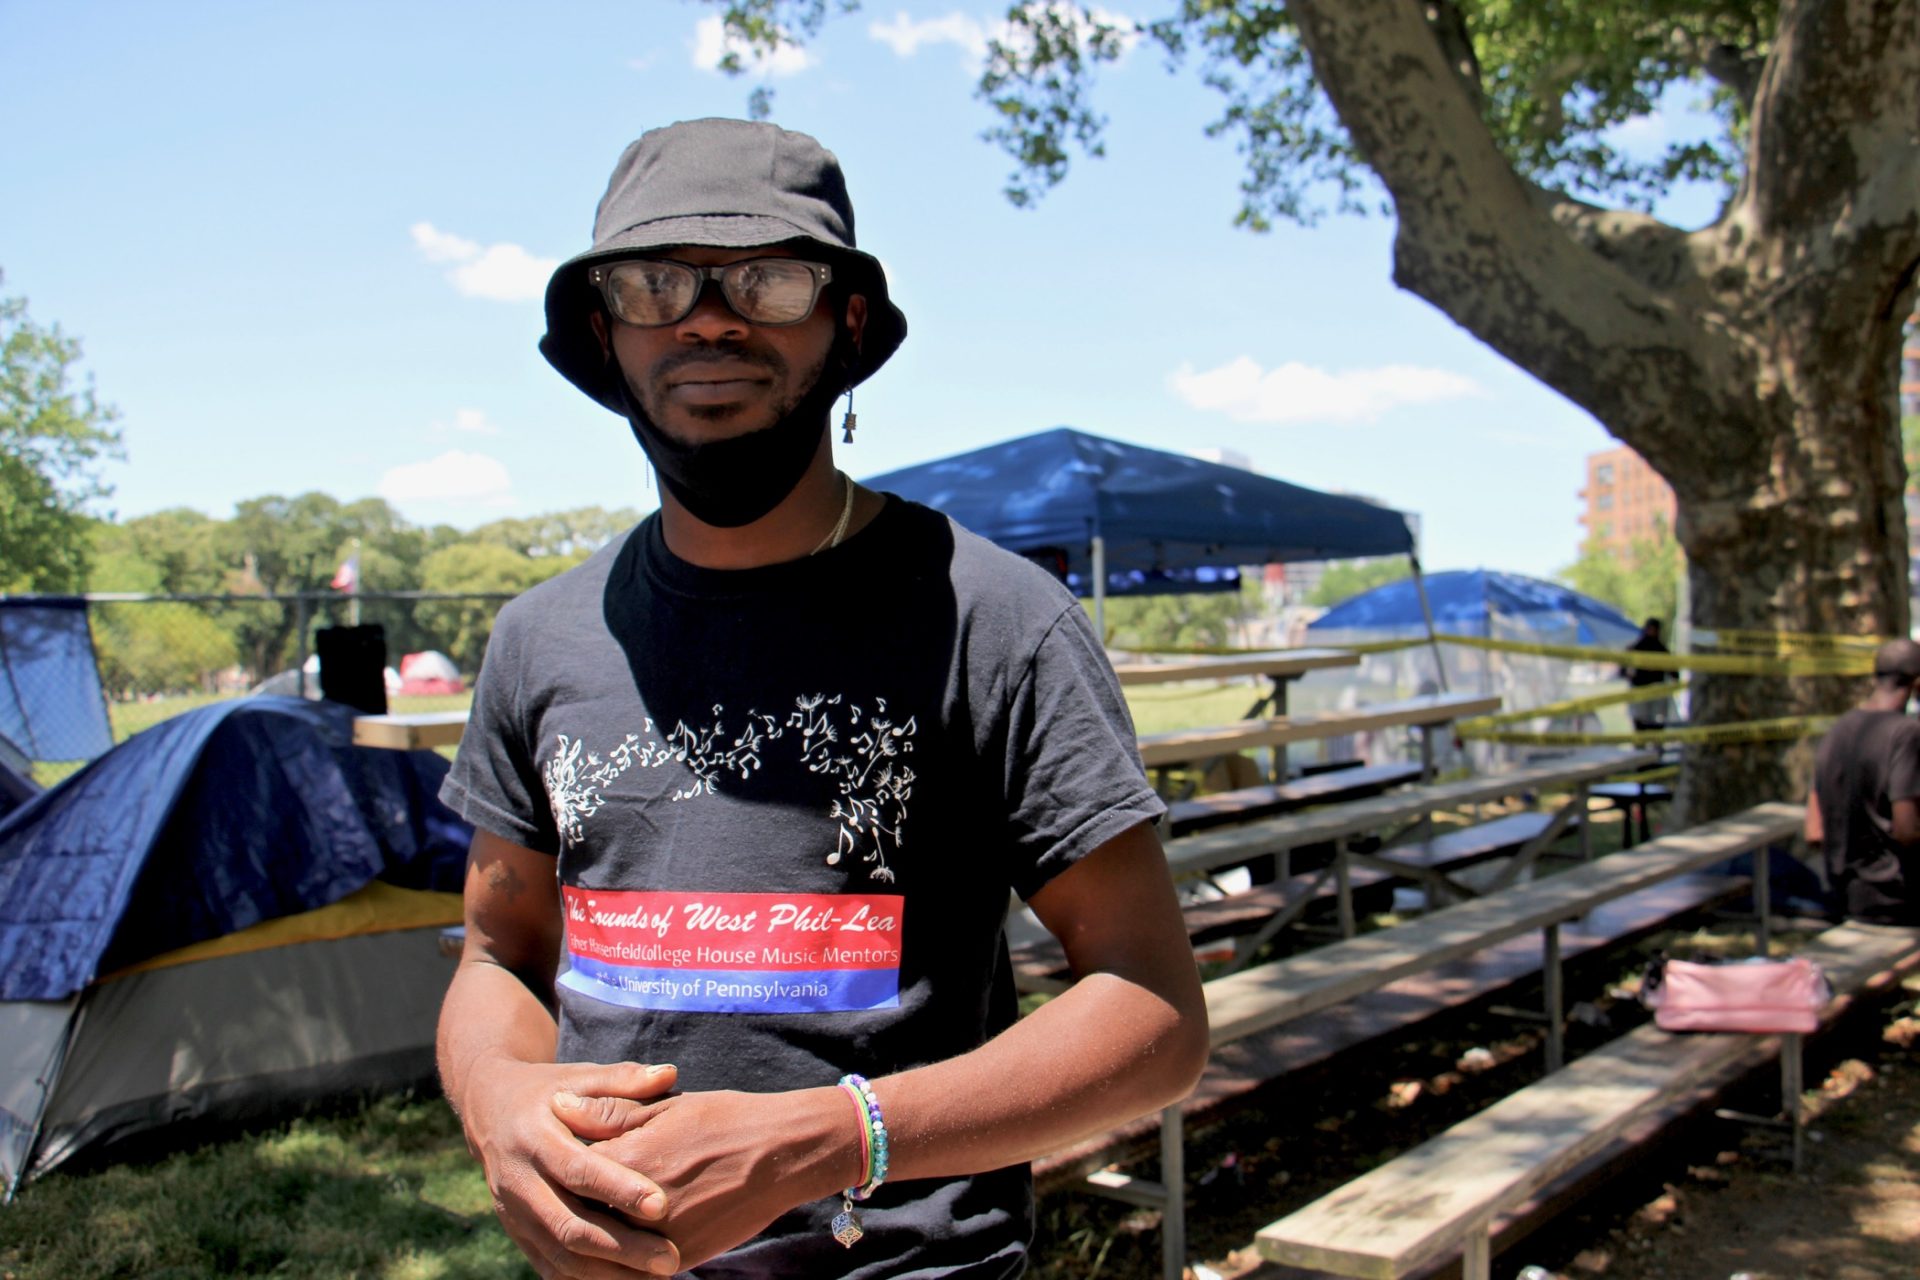 Jeremy Williams is housing coordinator at the homeless encampment on the Ben Franklin Parkway. He says more than 200 donated tents have been distributed, most of which have been pitched in the area around Von Colln Field.